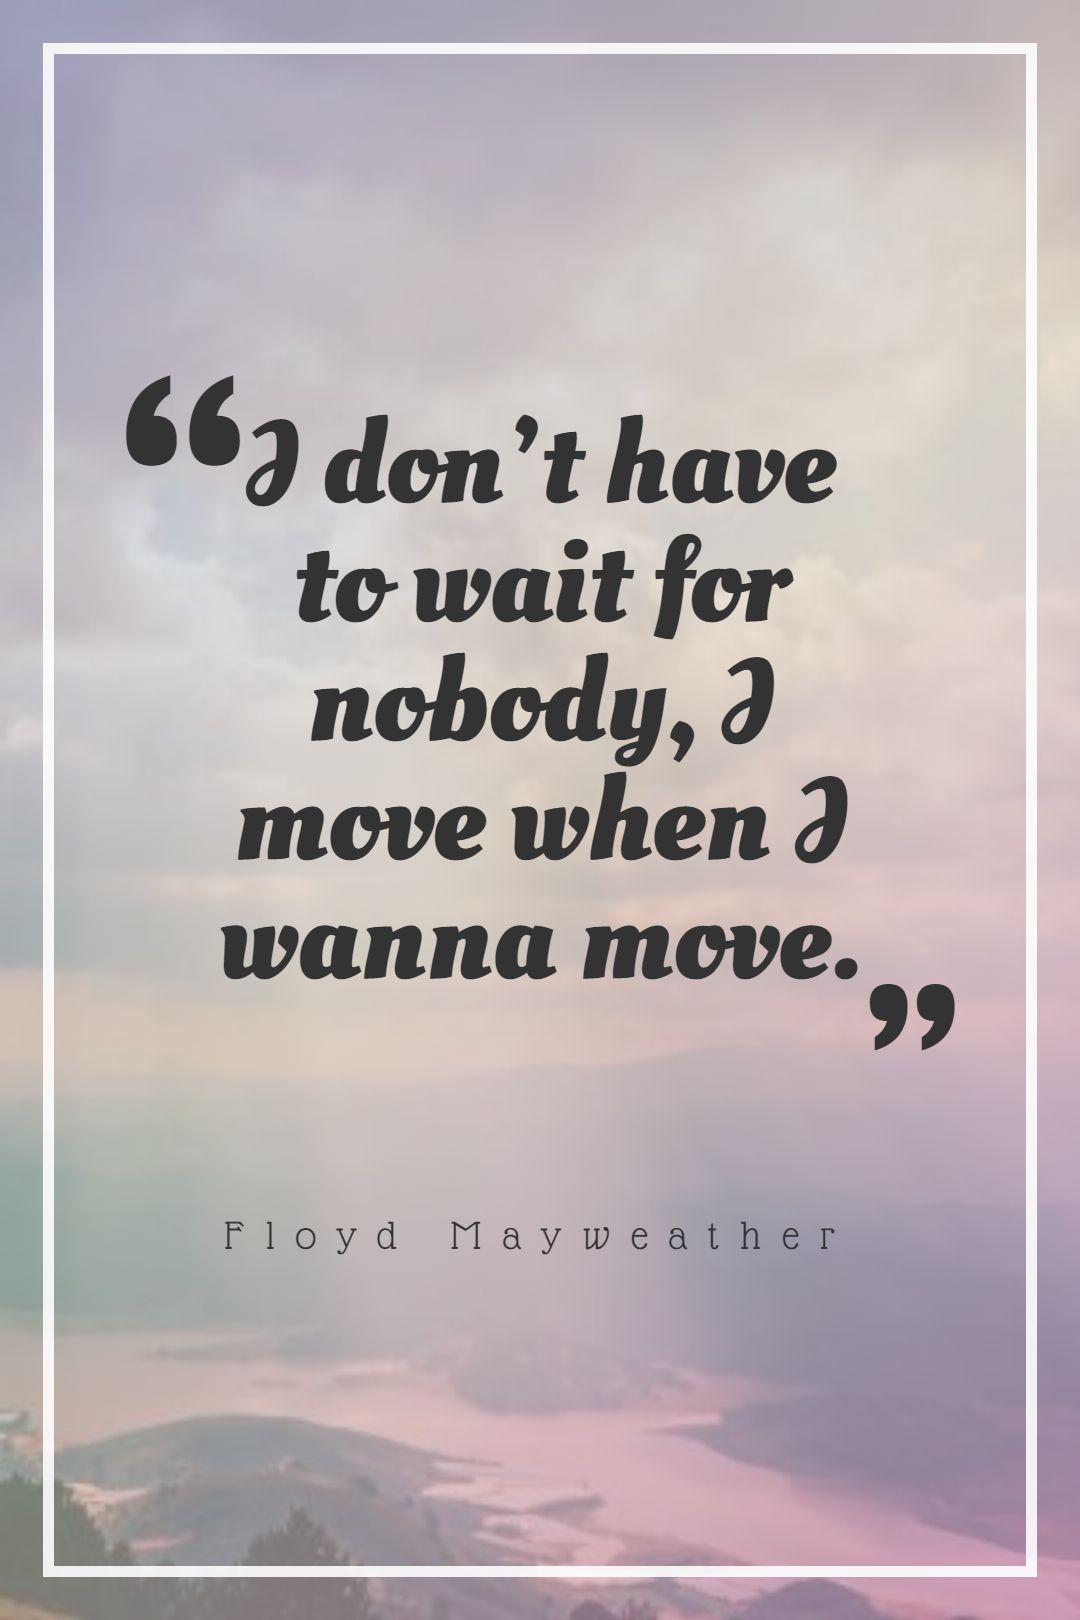 I don’t have to wait for nobody I move when I wanna move.